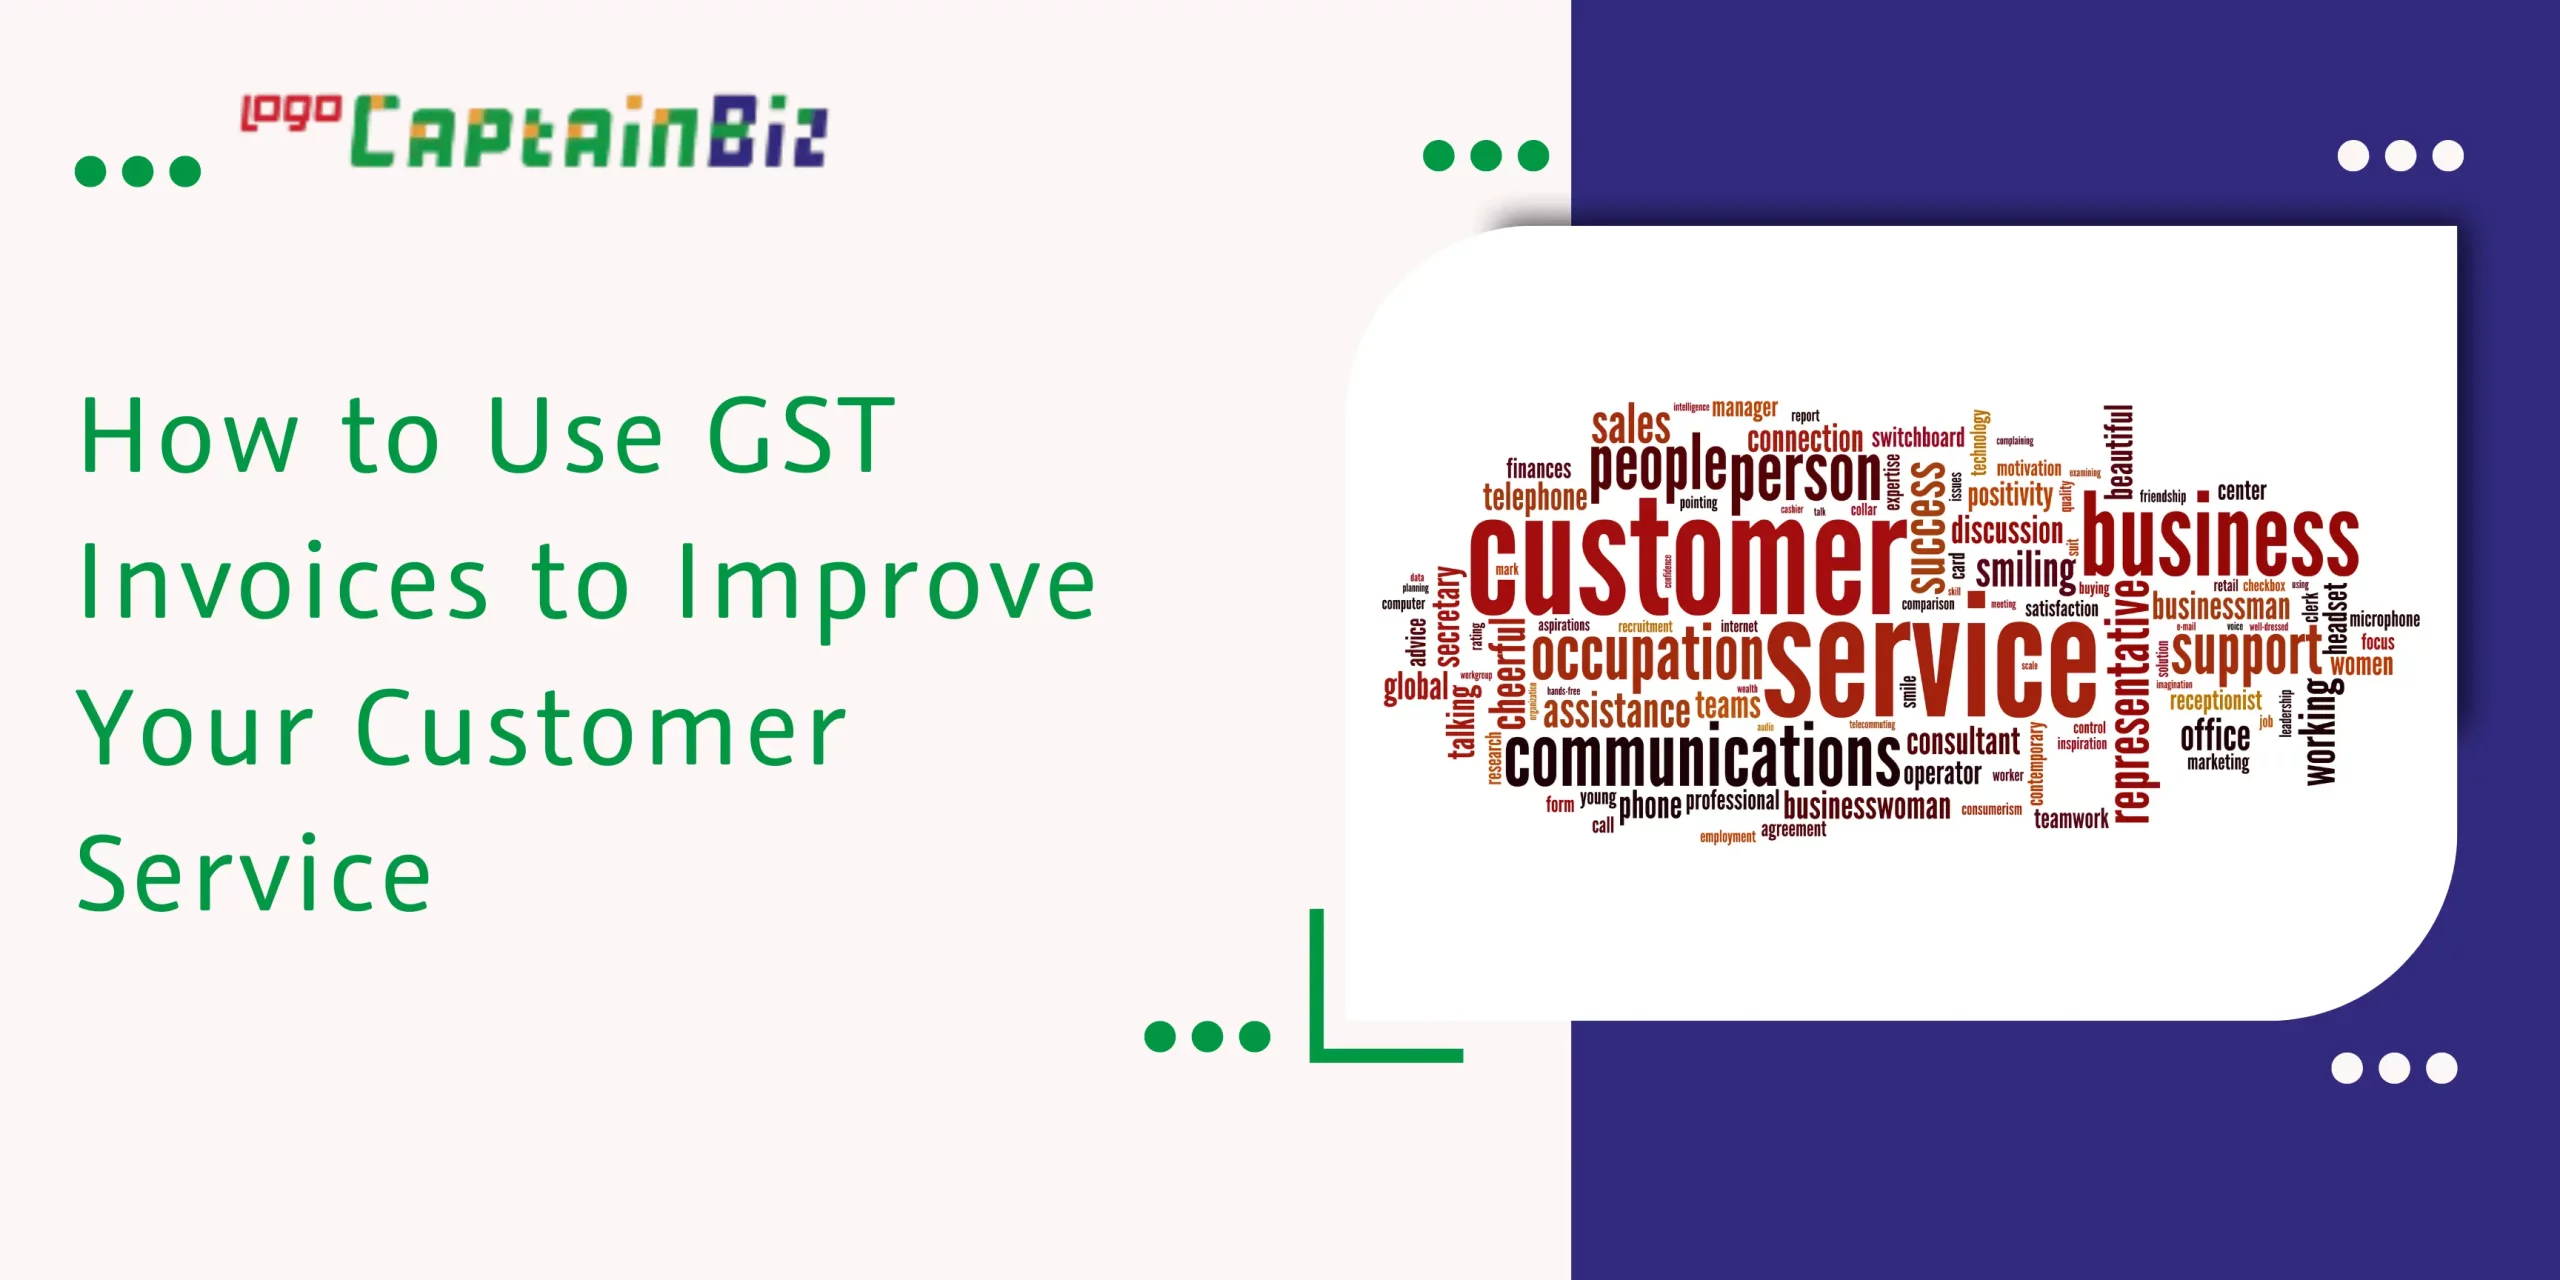 CaptainBiz: how to use gst invoices to improve your customer service